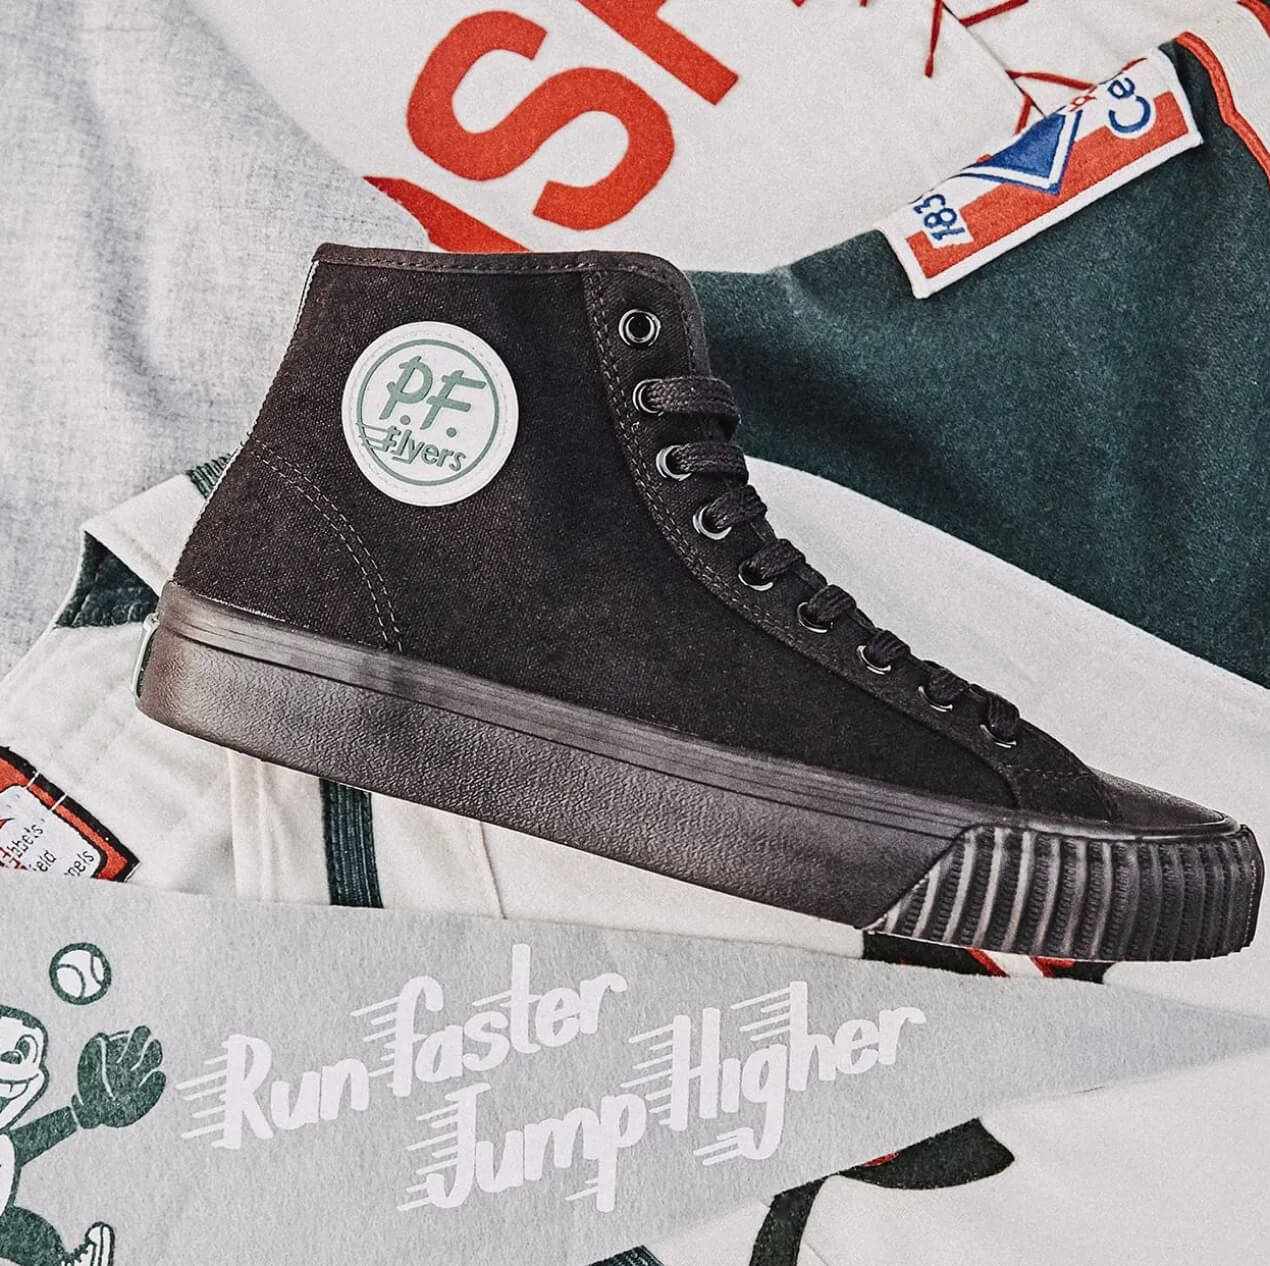 PF Flyers Sneaker with the quote "Run faster, jump higher"